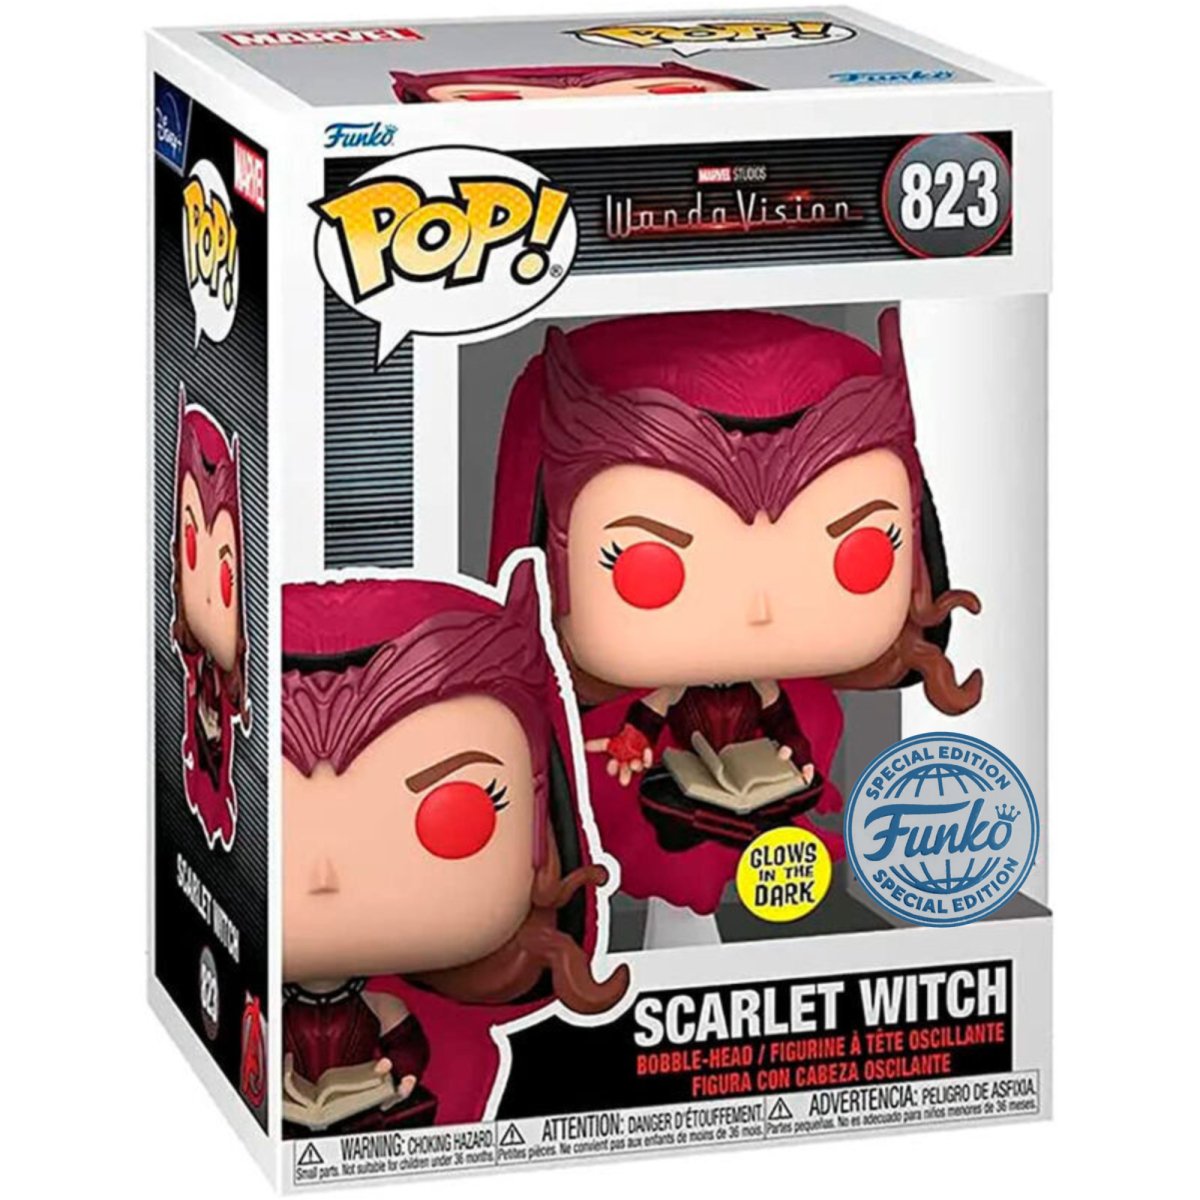 Wandavision - Scarlet Witch [with Dark Hold Book] (GITD Special Edition) #823 - Funko Pop! Vinyl Marvel - Persona Toys